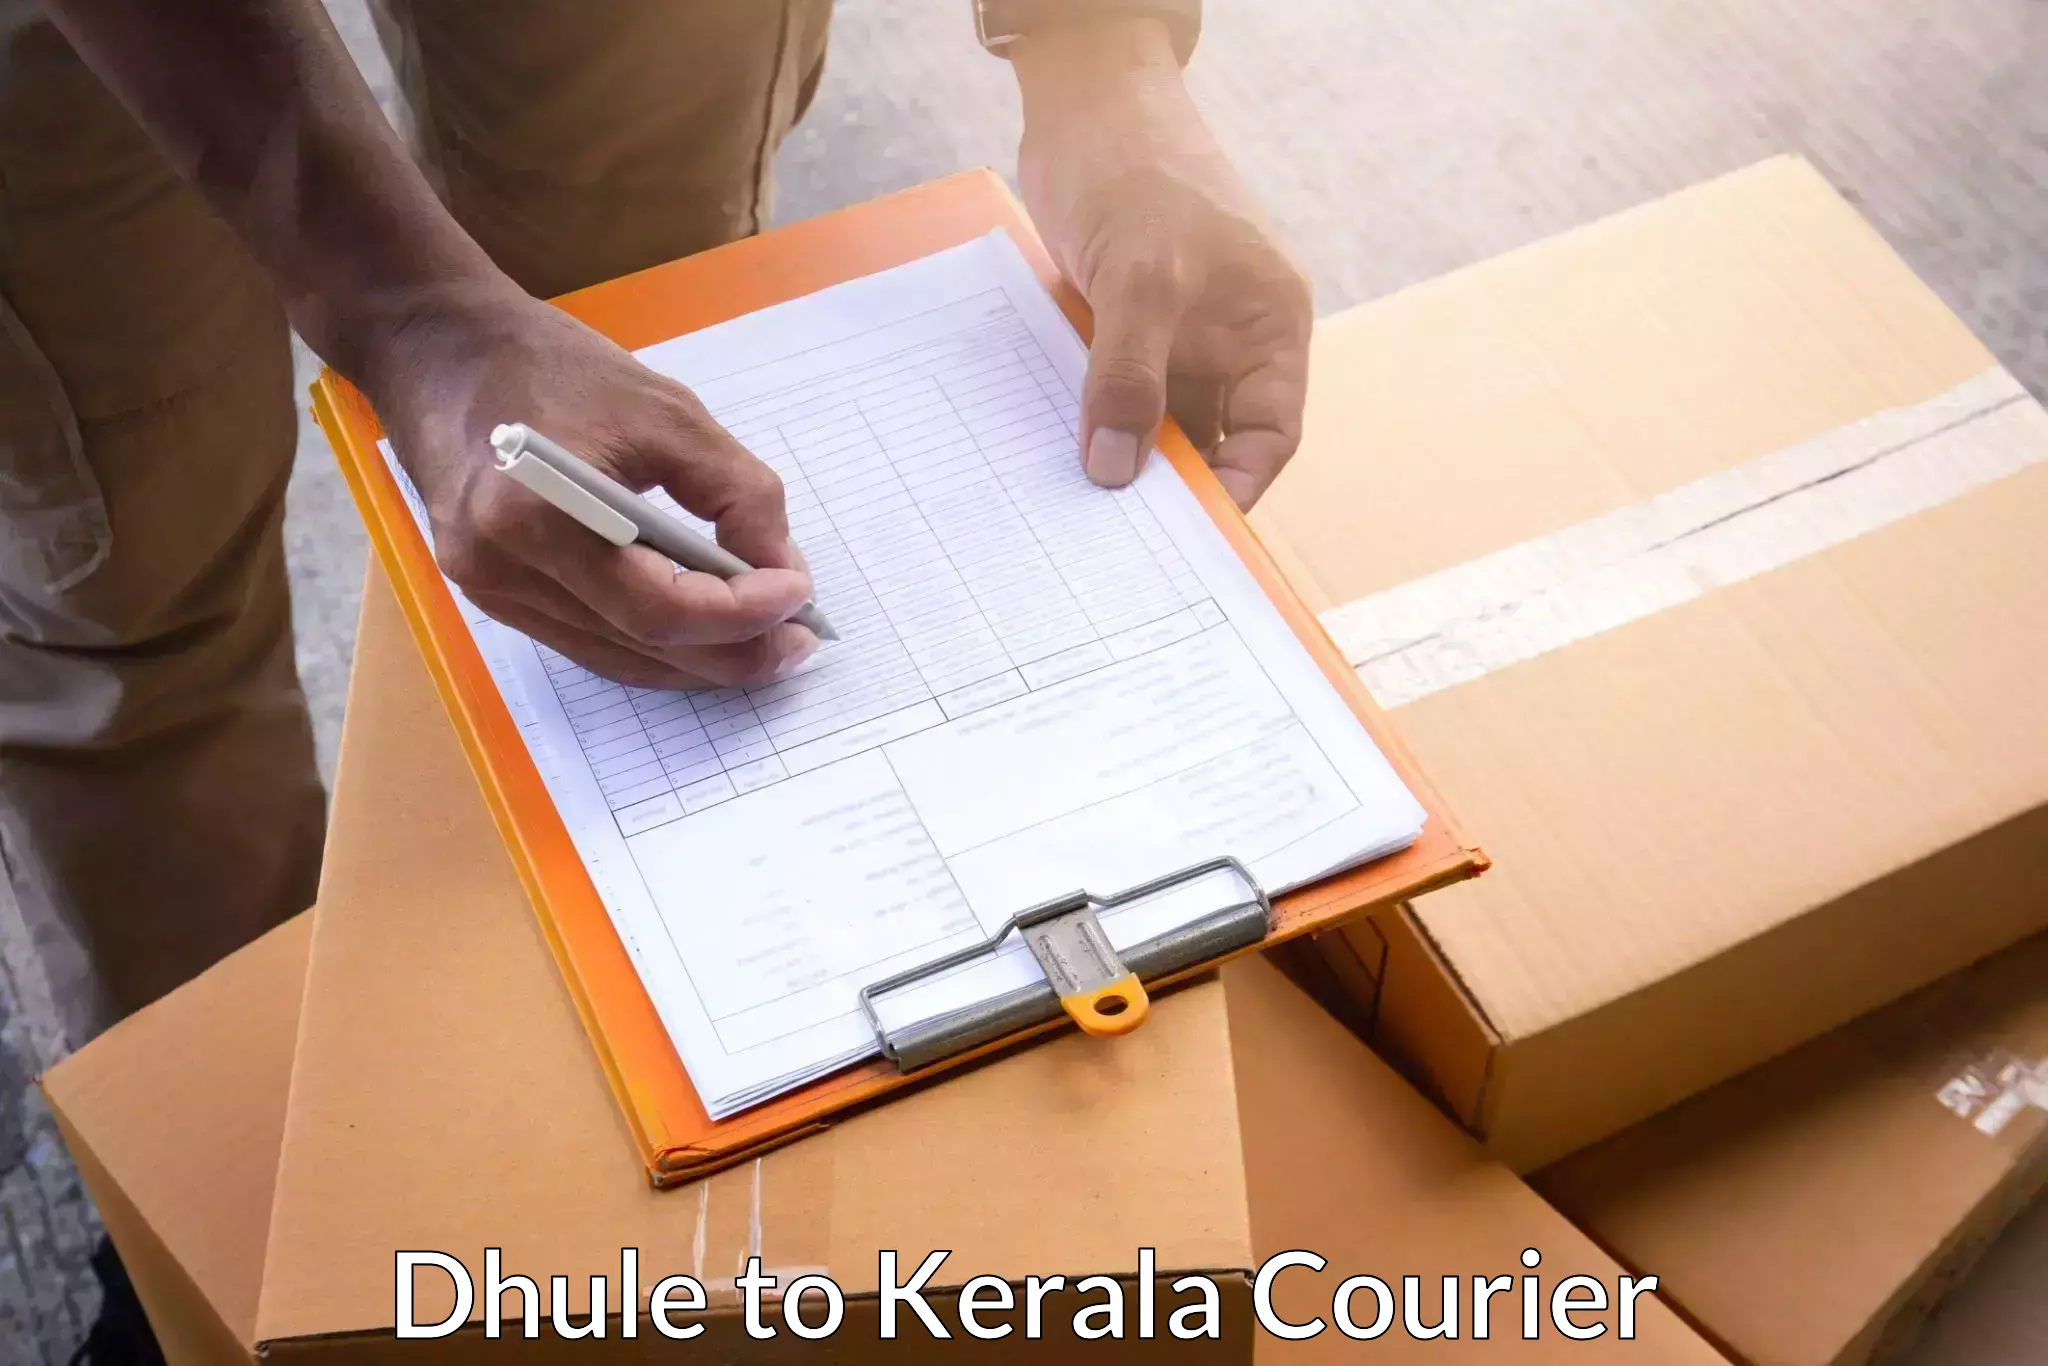 Affordable parcel service Dhule to Cochin Port Kochi